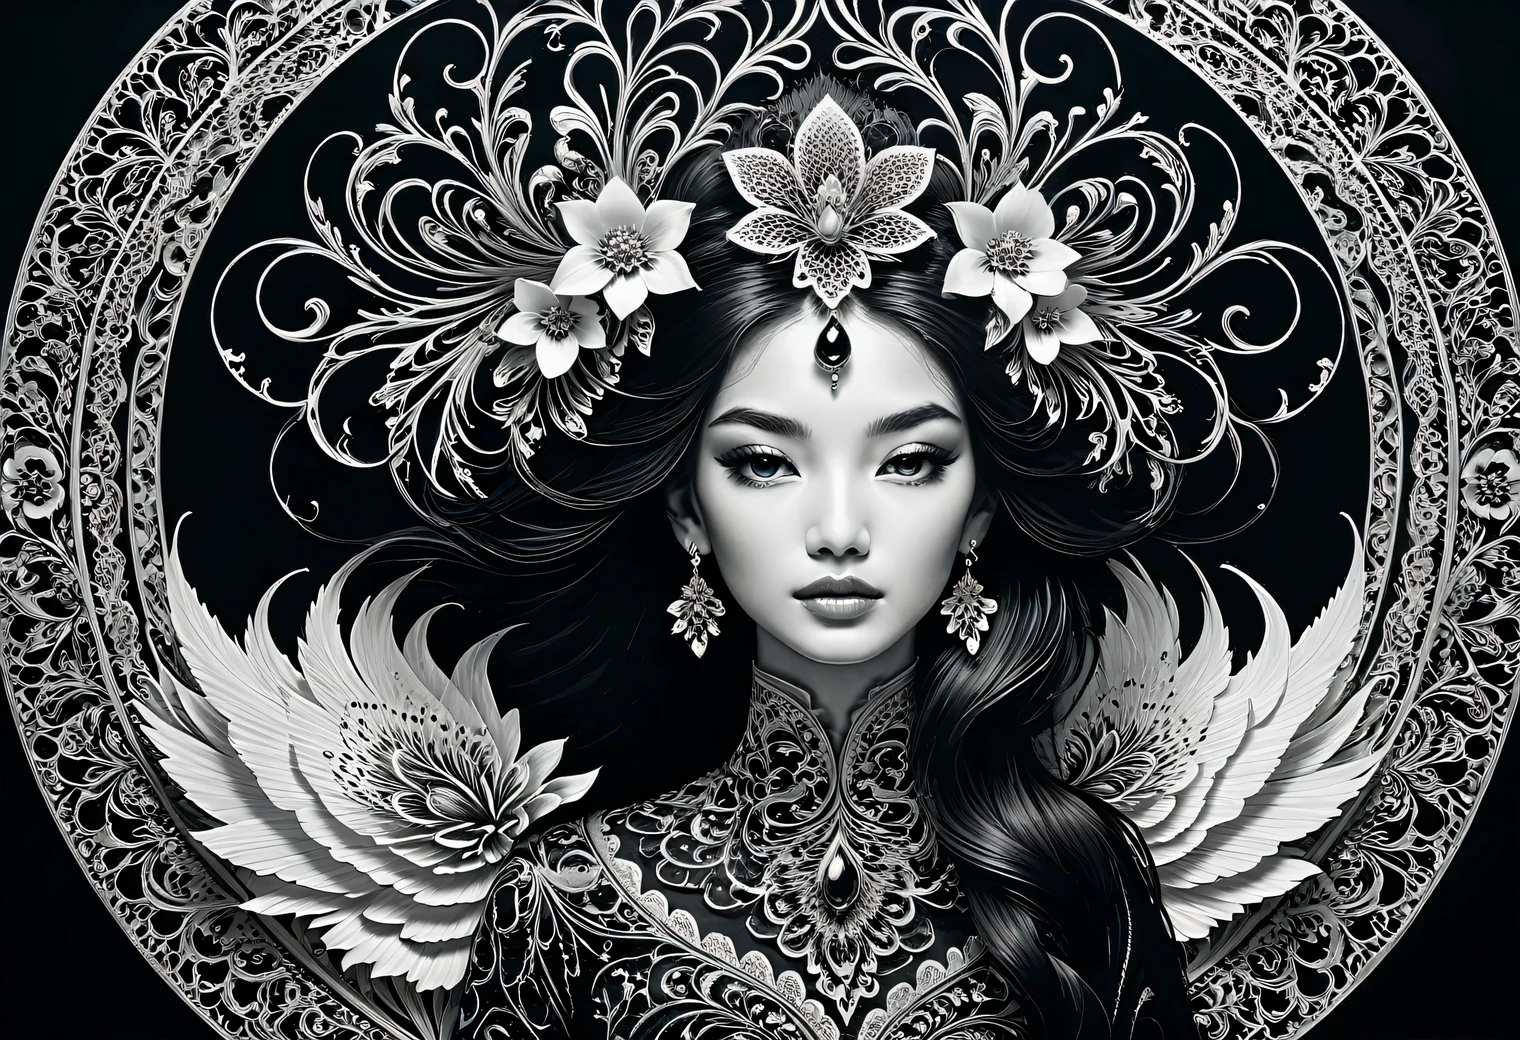 Black and White Art, black art, white art, style, grace, mesmerizing, the work of a black and white master, filigree, intricate, depth of volume, illusion in the image